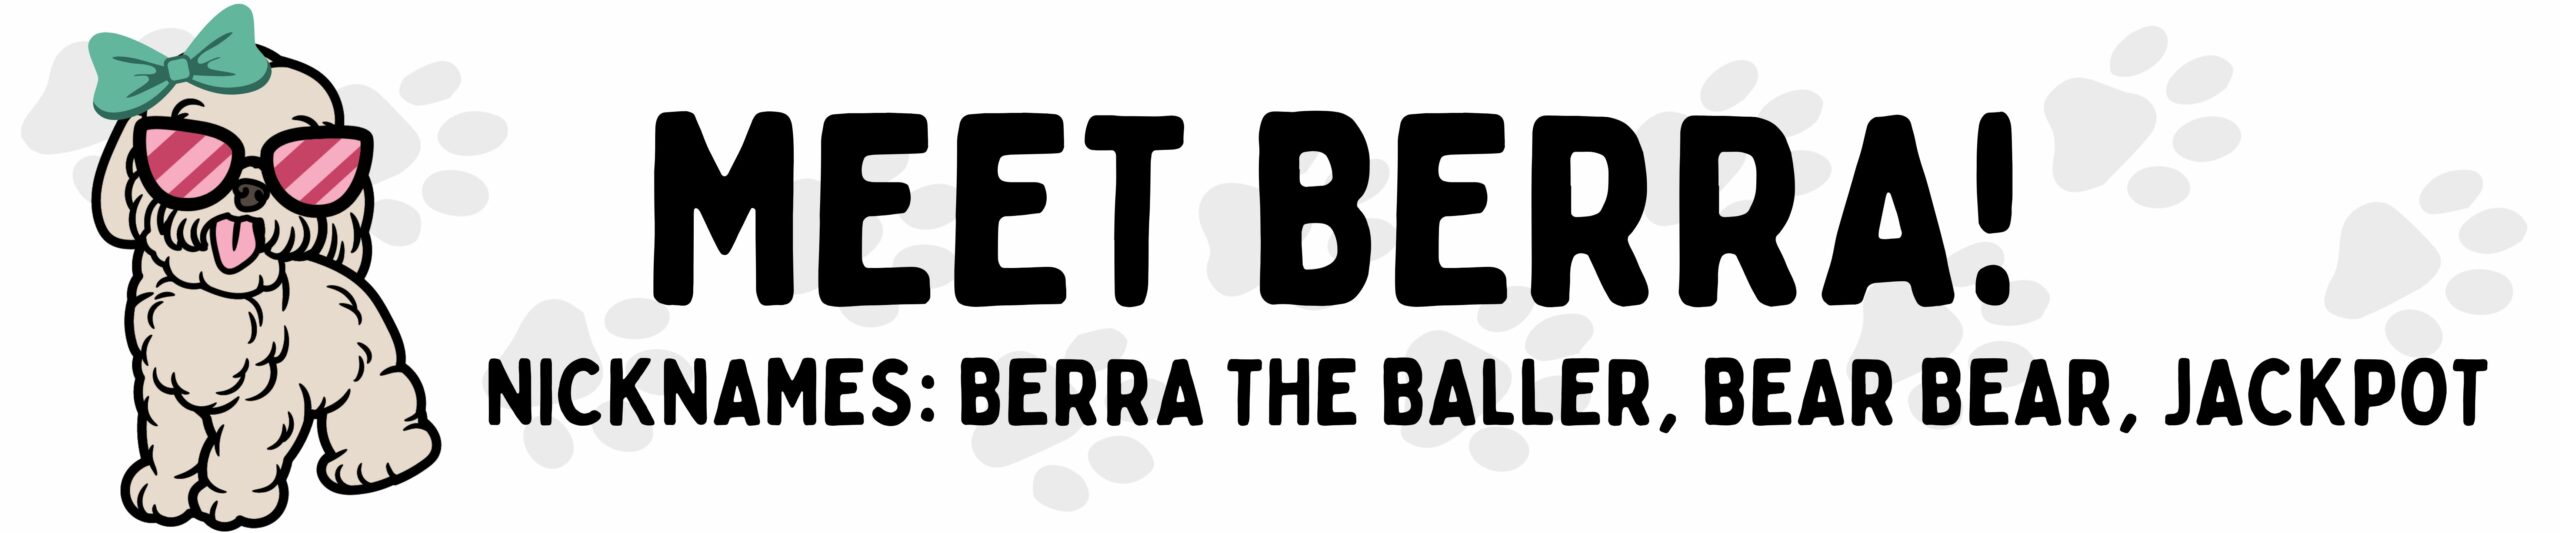 pet of the month - berra